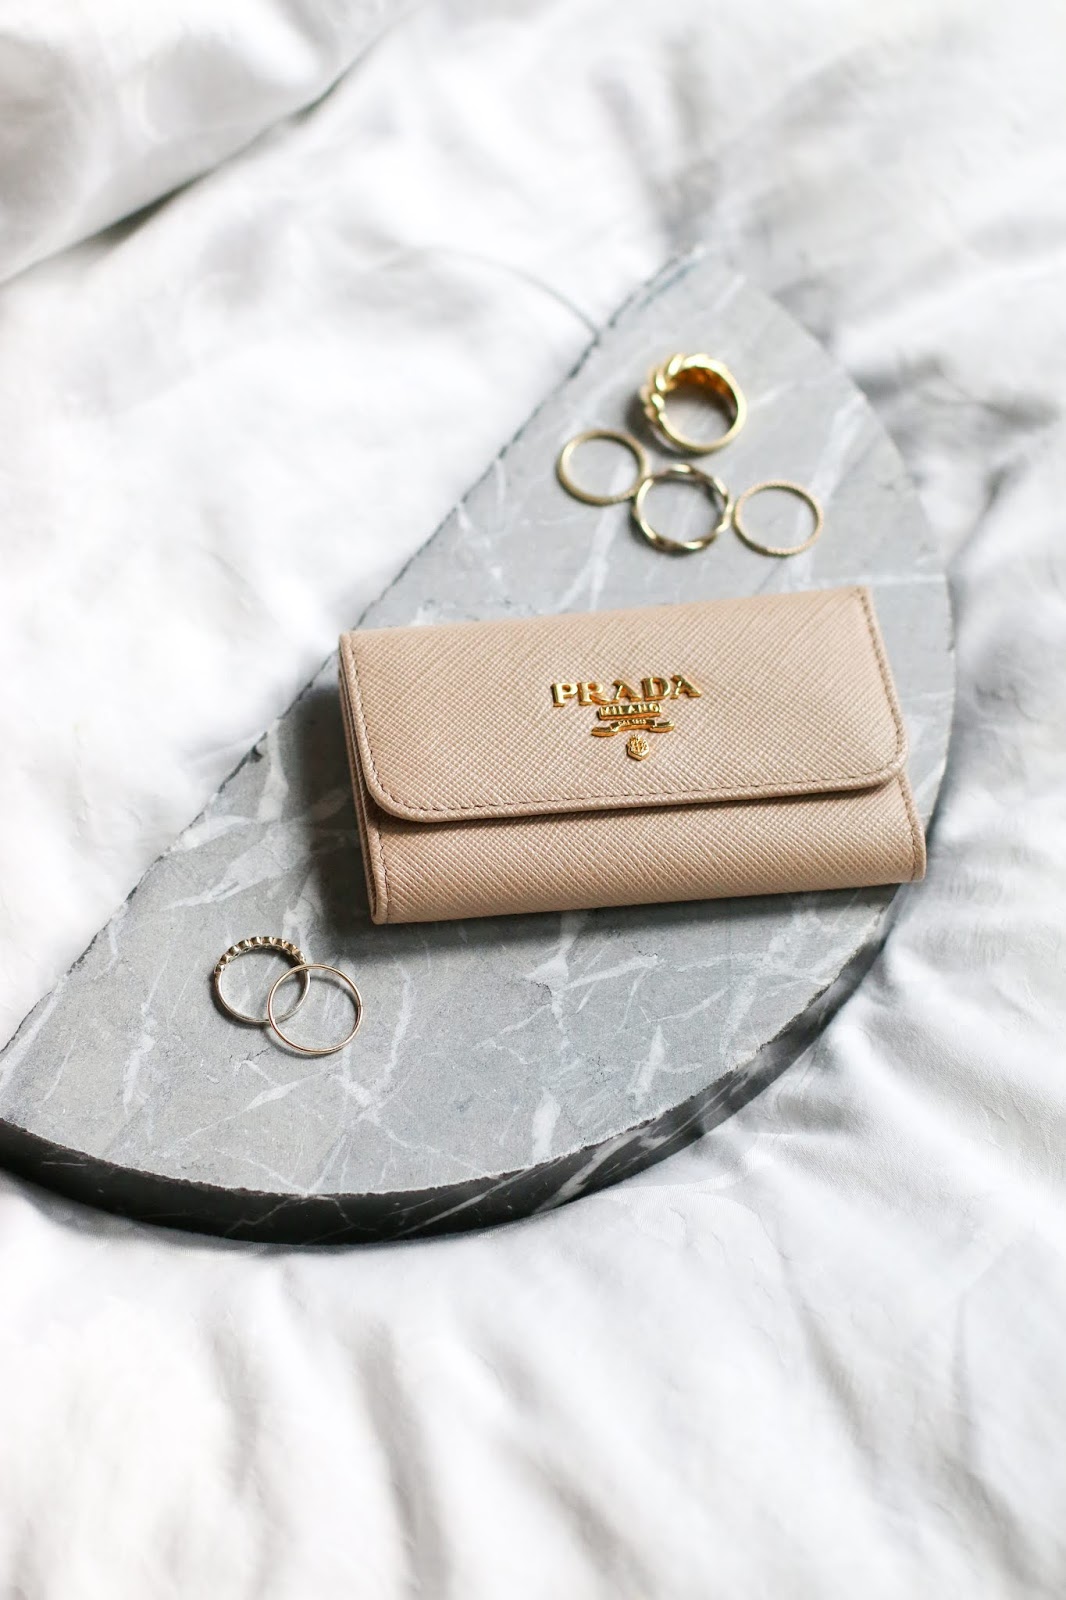 LUXURY SLG (SMALL LEATHER GOODS) COLLECTION